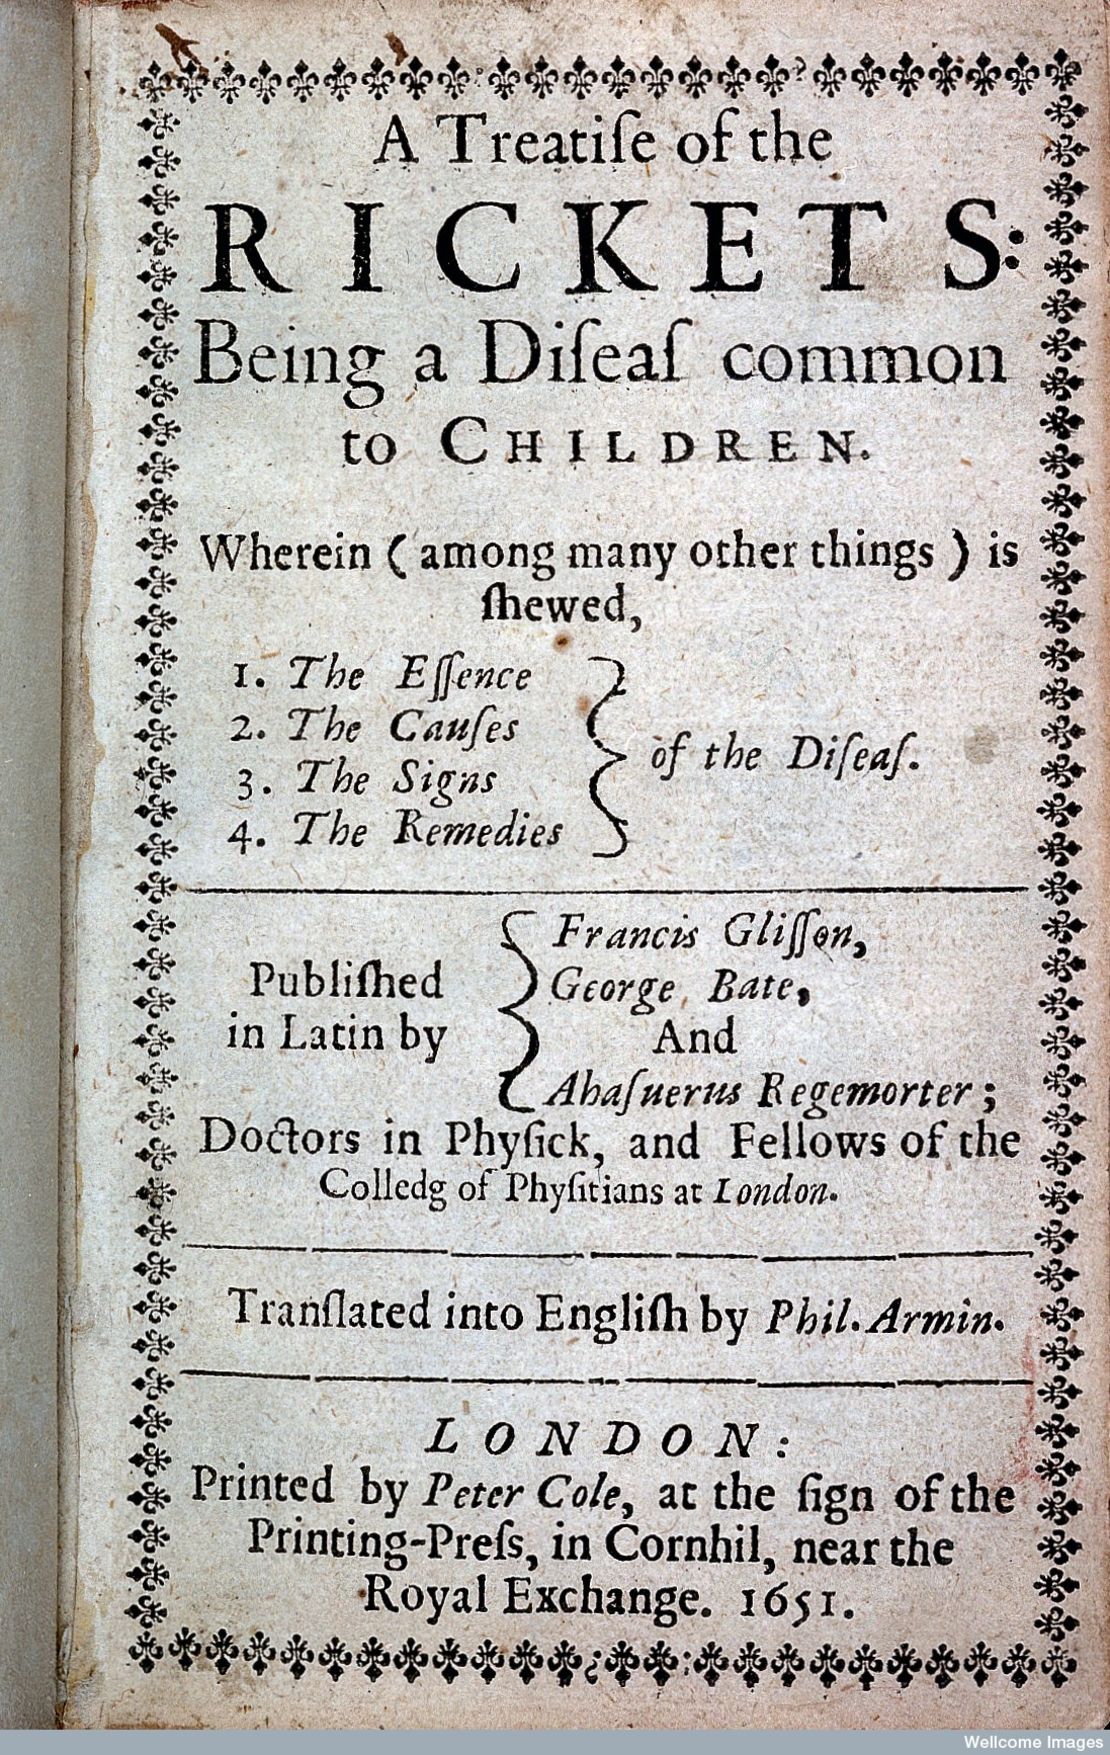 "A treatise of the Rickets," published 1651.